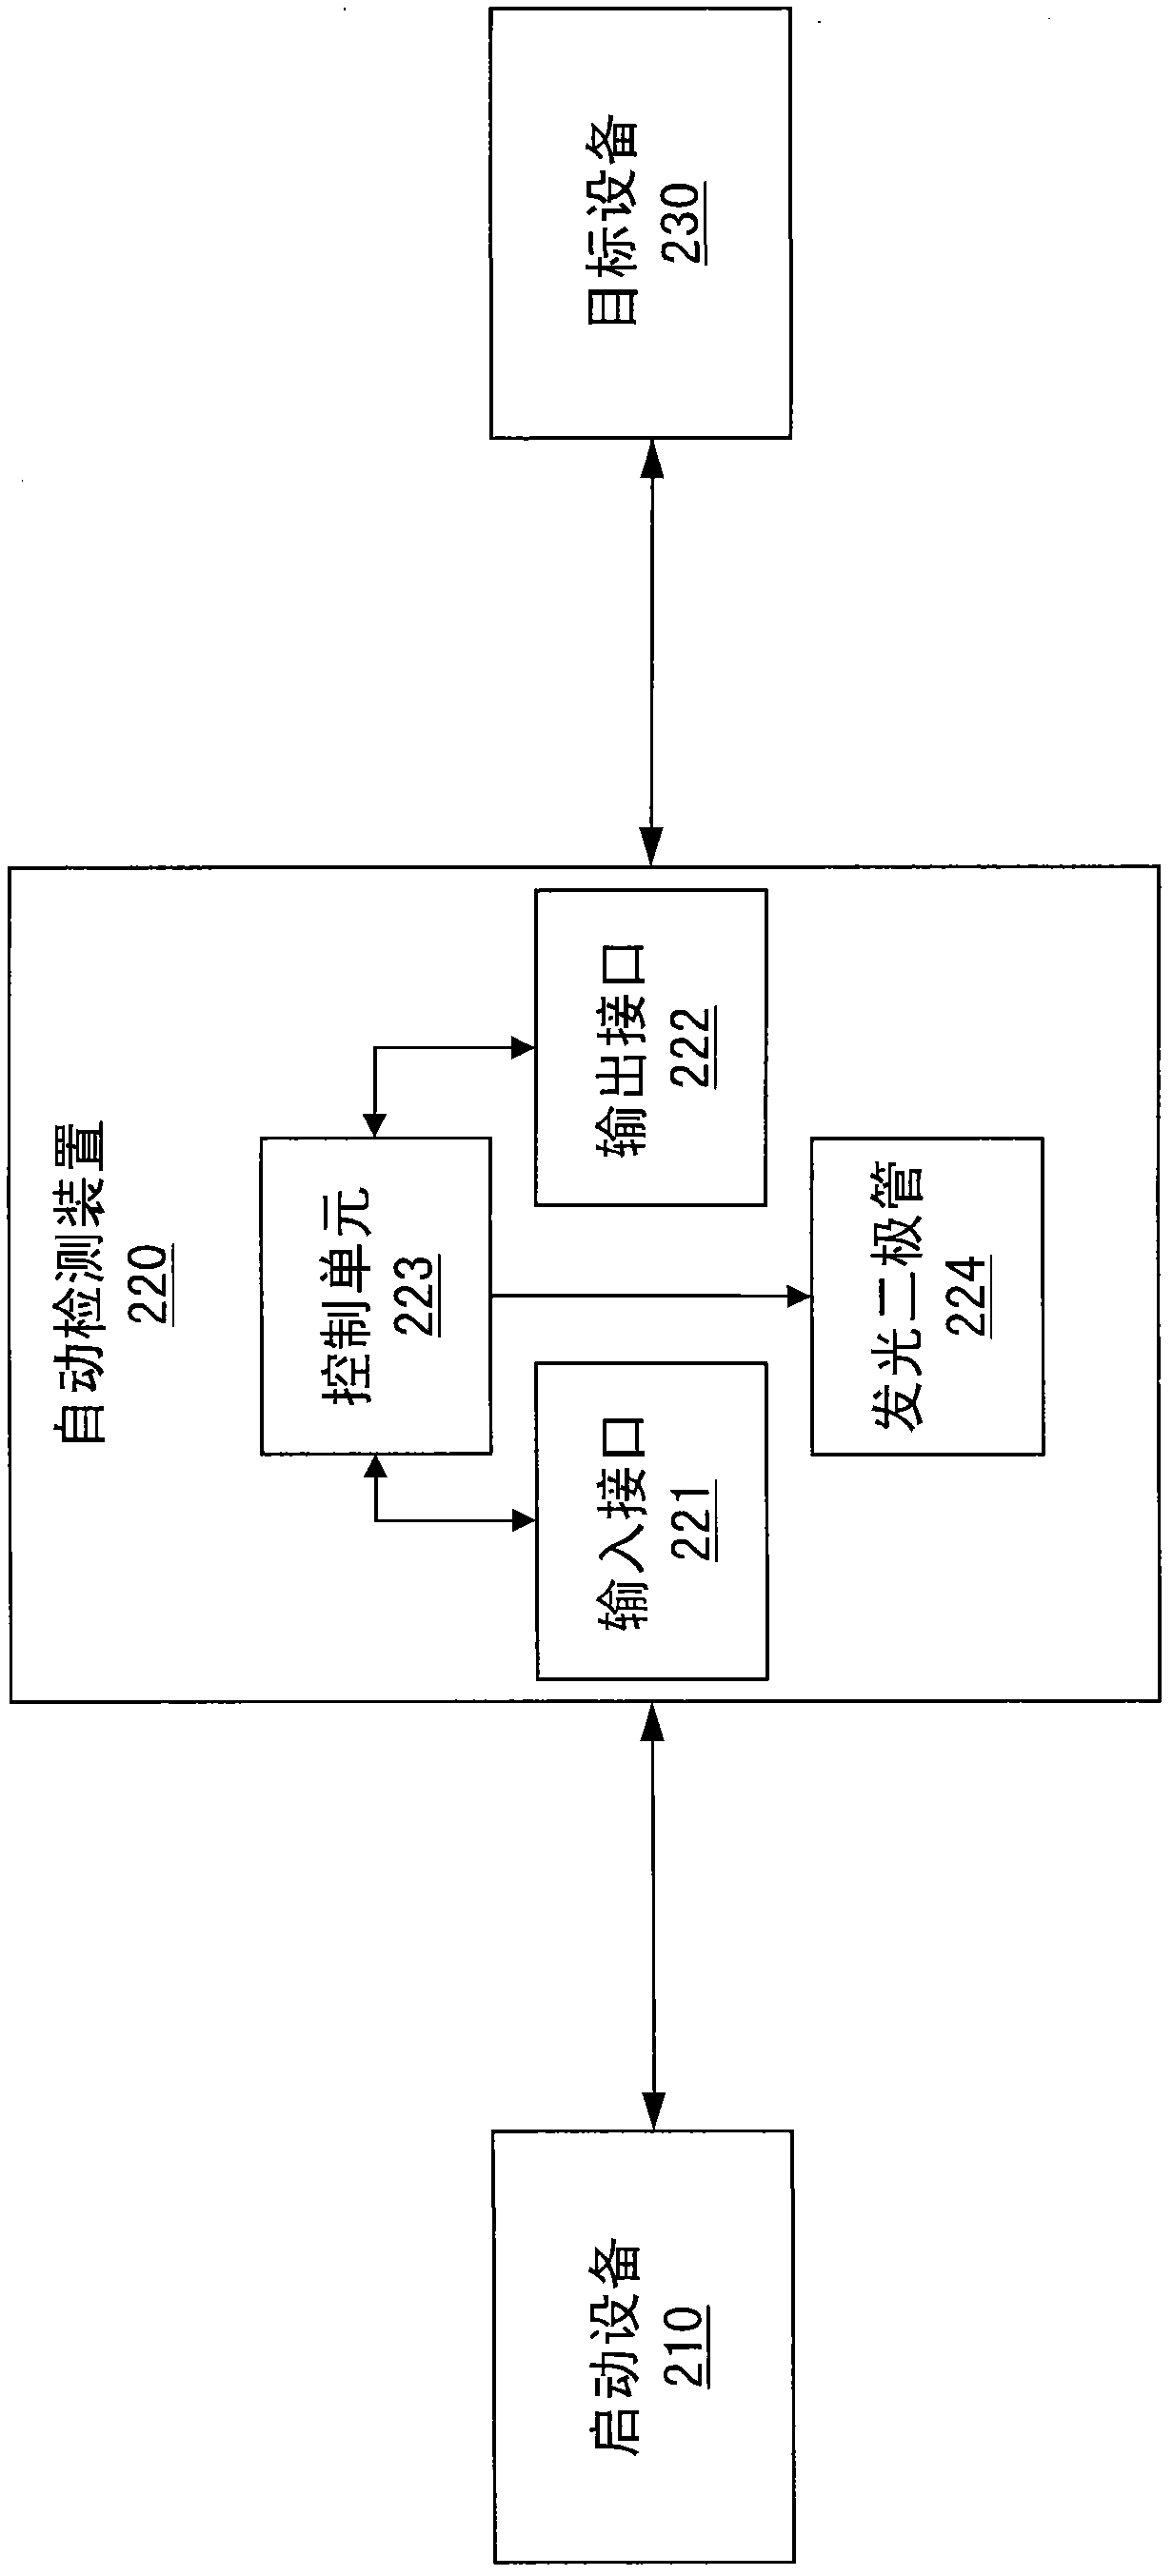 Device, system and method for automatically detecting inter-integrated circuit (I2C) and SGPIO (serious general-purpose input/output)